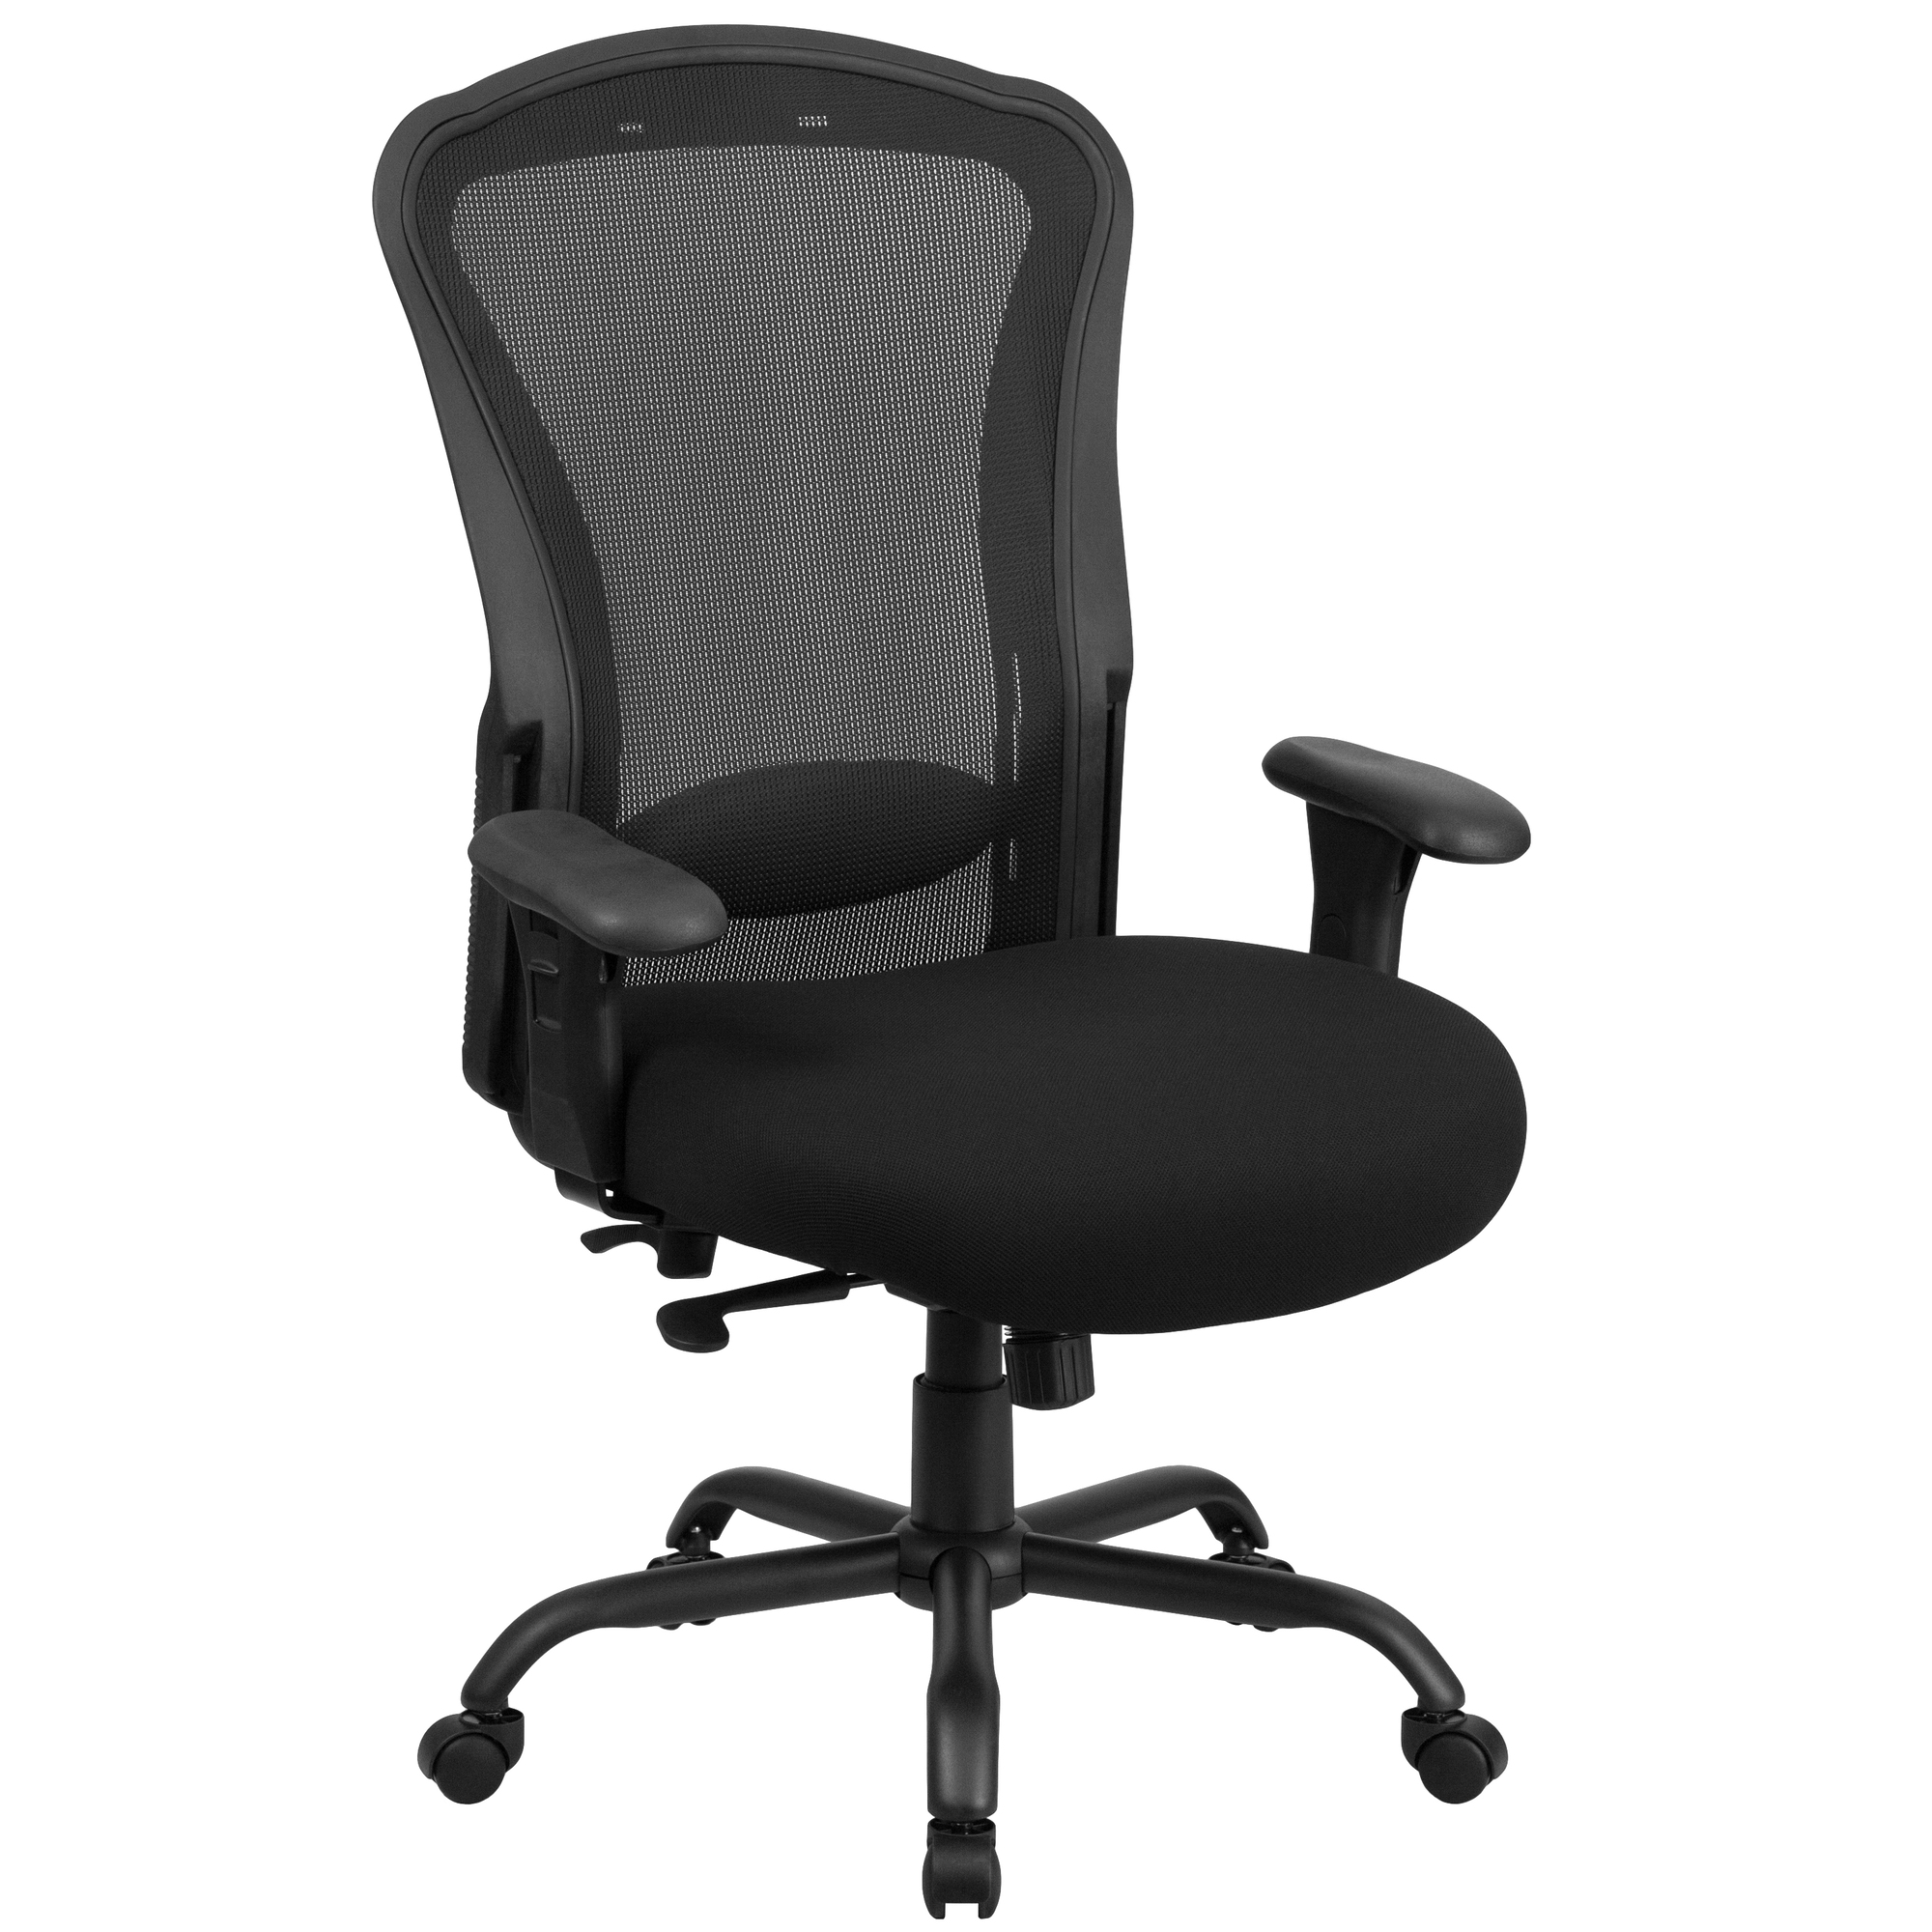 24/7 400 lb. Rated Black Mesh Multifunction Chair, Primary Color Black, Included (qty.) 1, Model - Flash Furniture LQ3BK